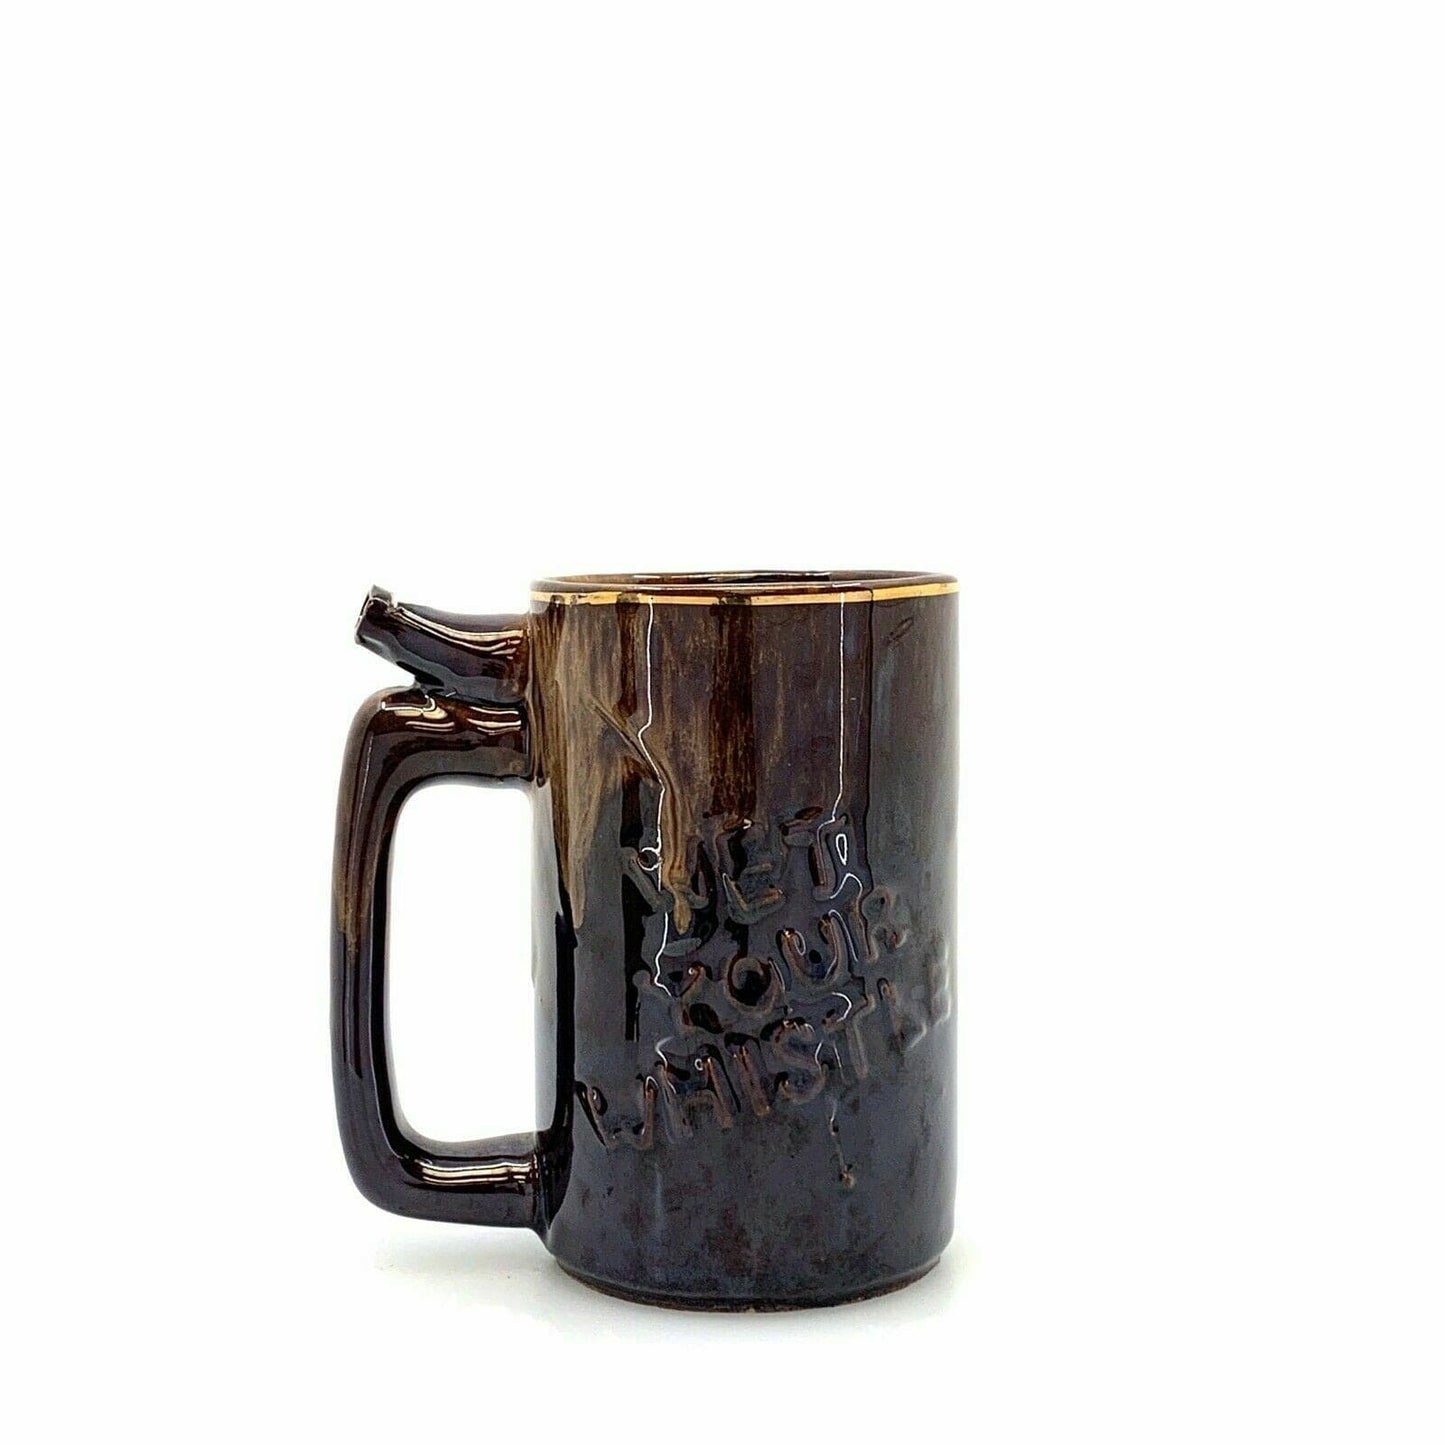 Vintage Beer Mug Whistle for your Beer • Wet your Whistle Brown Glaze Barware - parsimonyshoppes